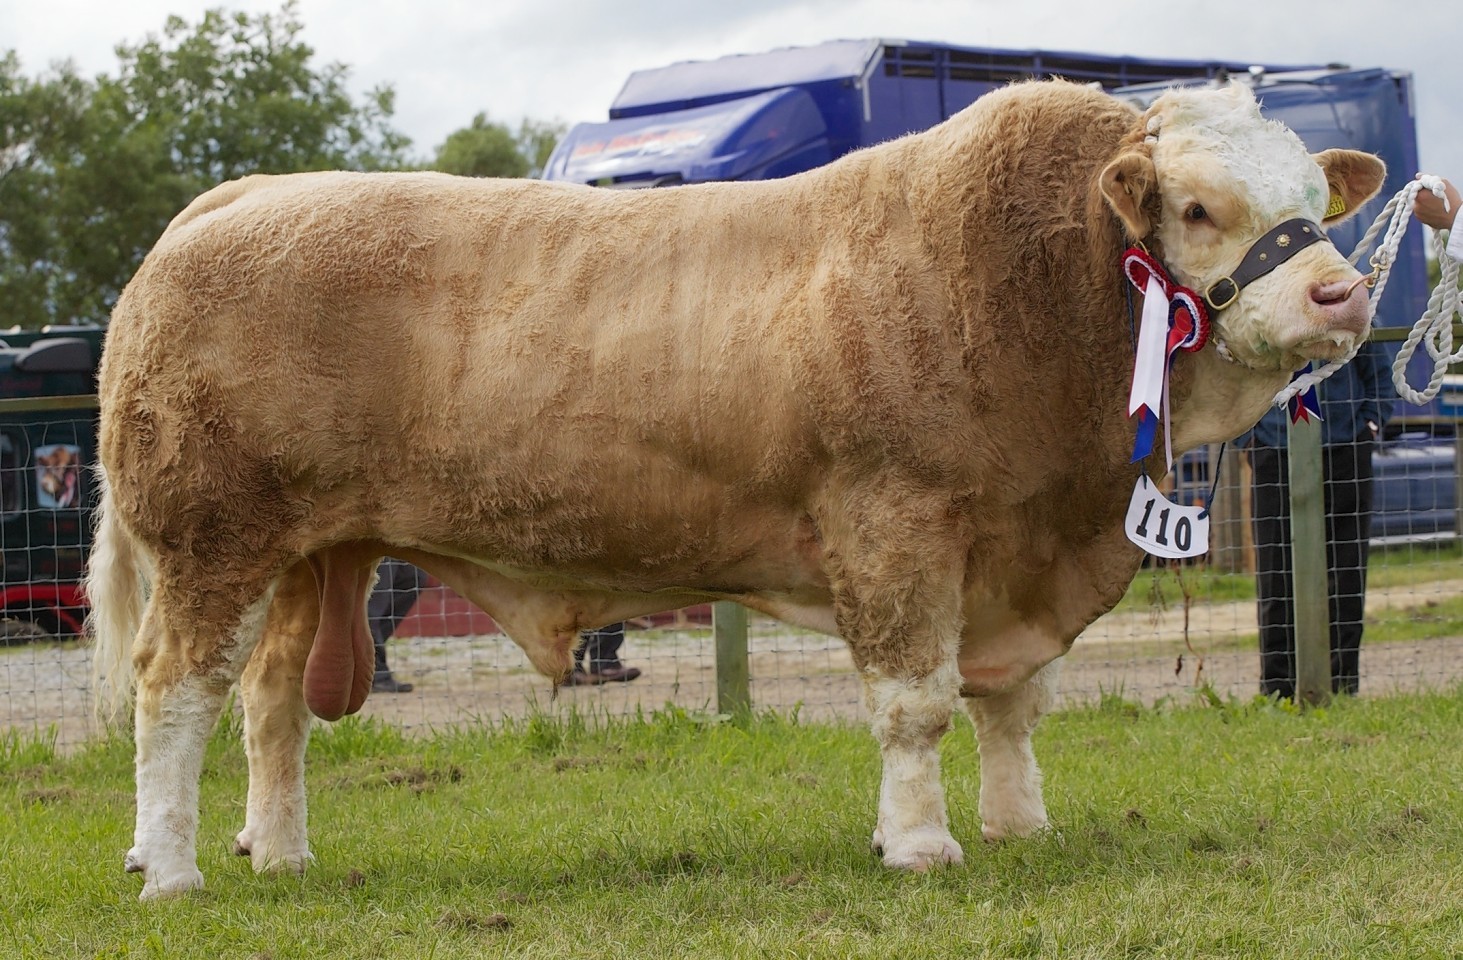 The Simmental breed champion was crowned beef interbreed champion